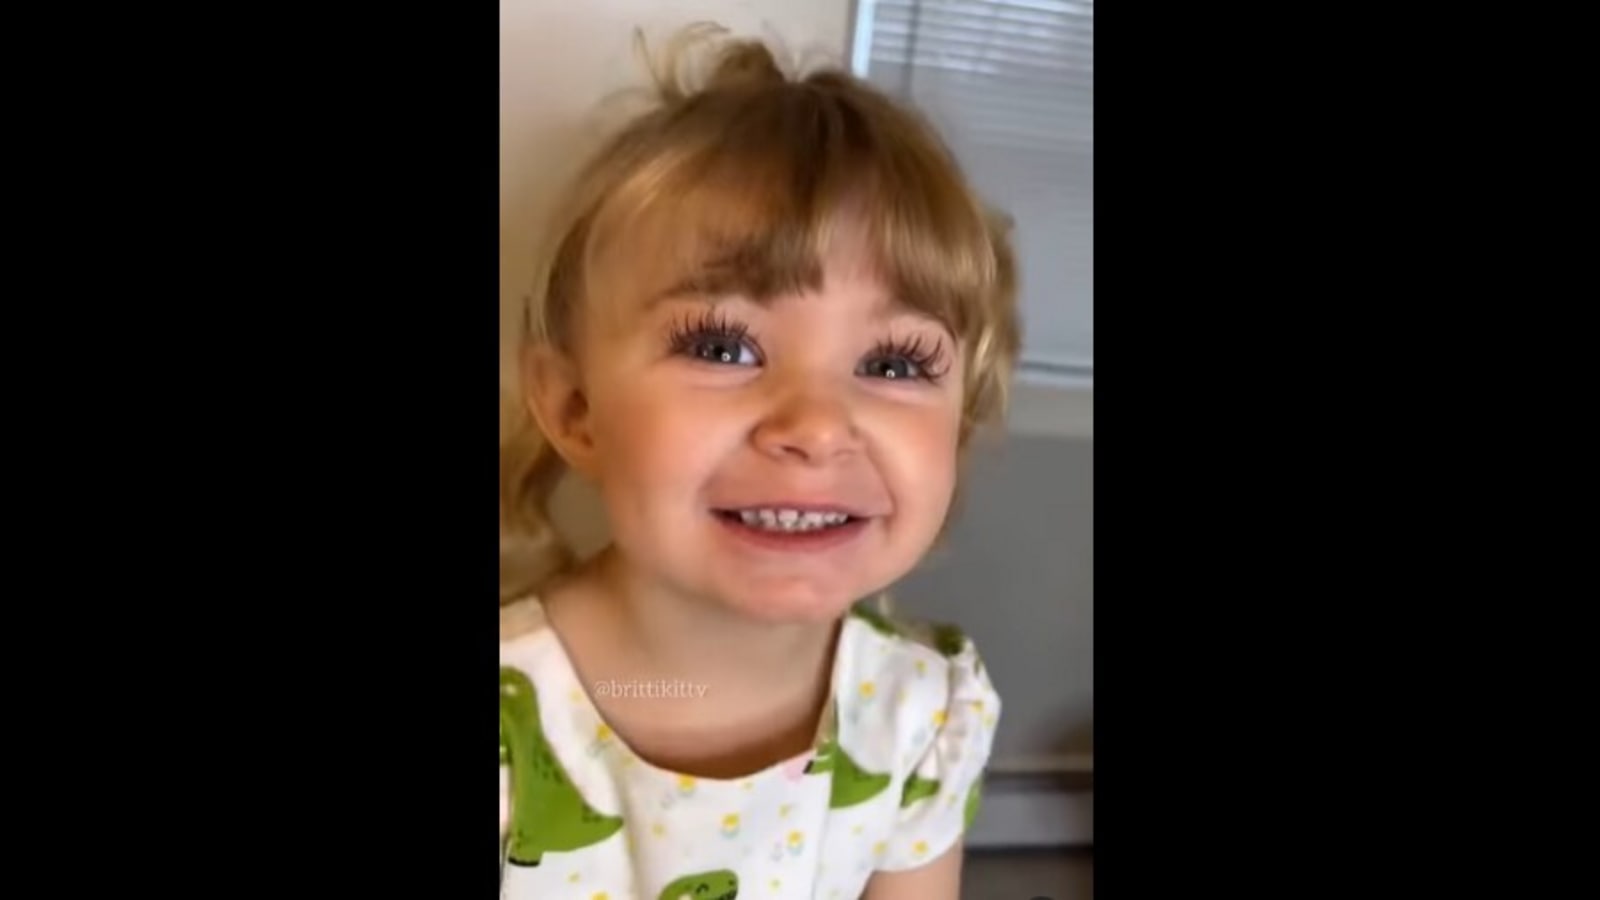 https://images.hindustantimes.com/img/2022/01/19/1600x900/Little_girl_reaction_after_putting_on_makeup_is_hilariously_adorable_Watch_1642591559045_1642591584192.png